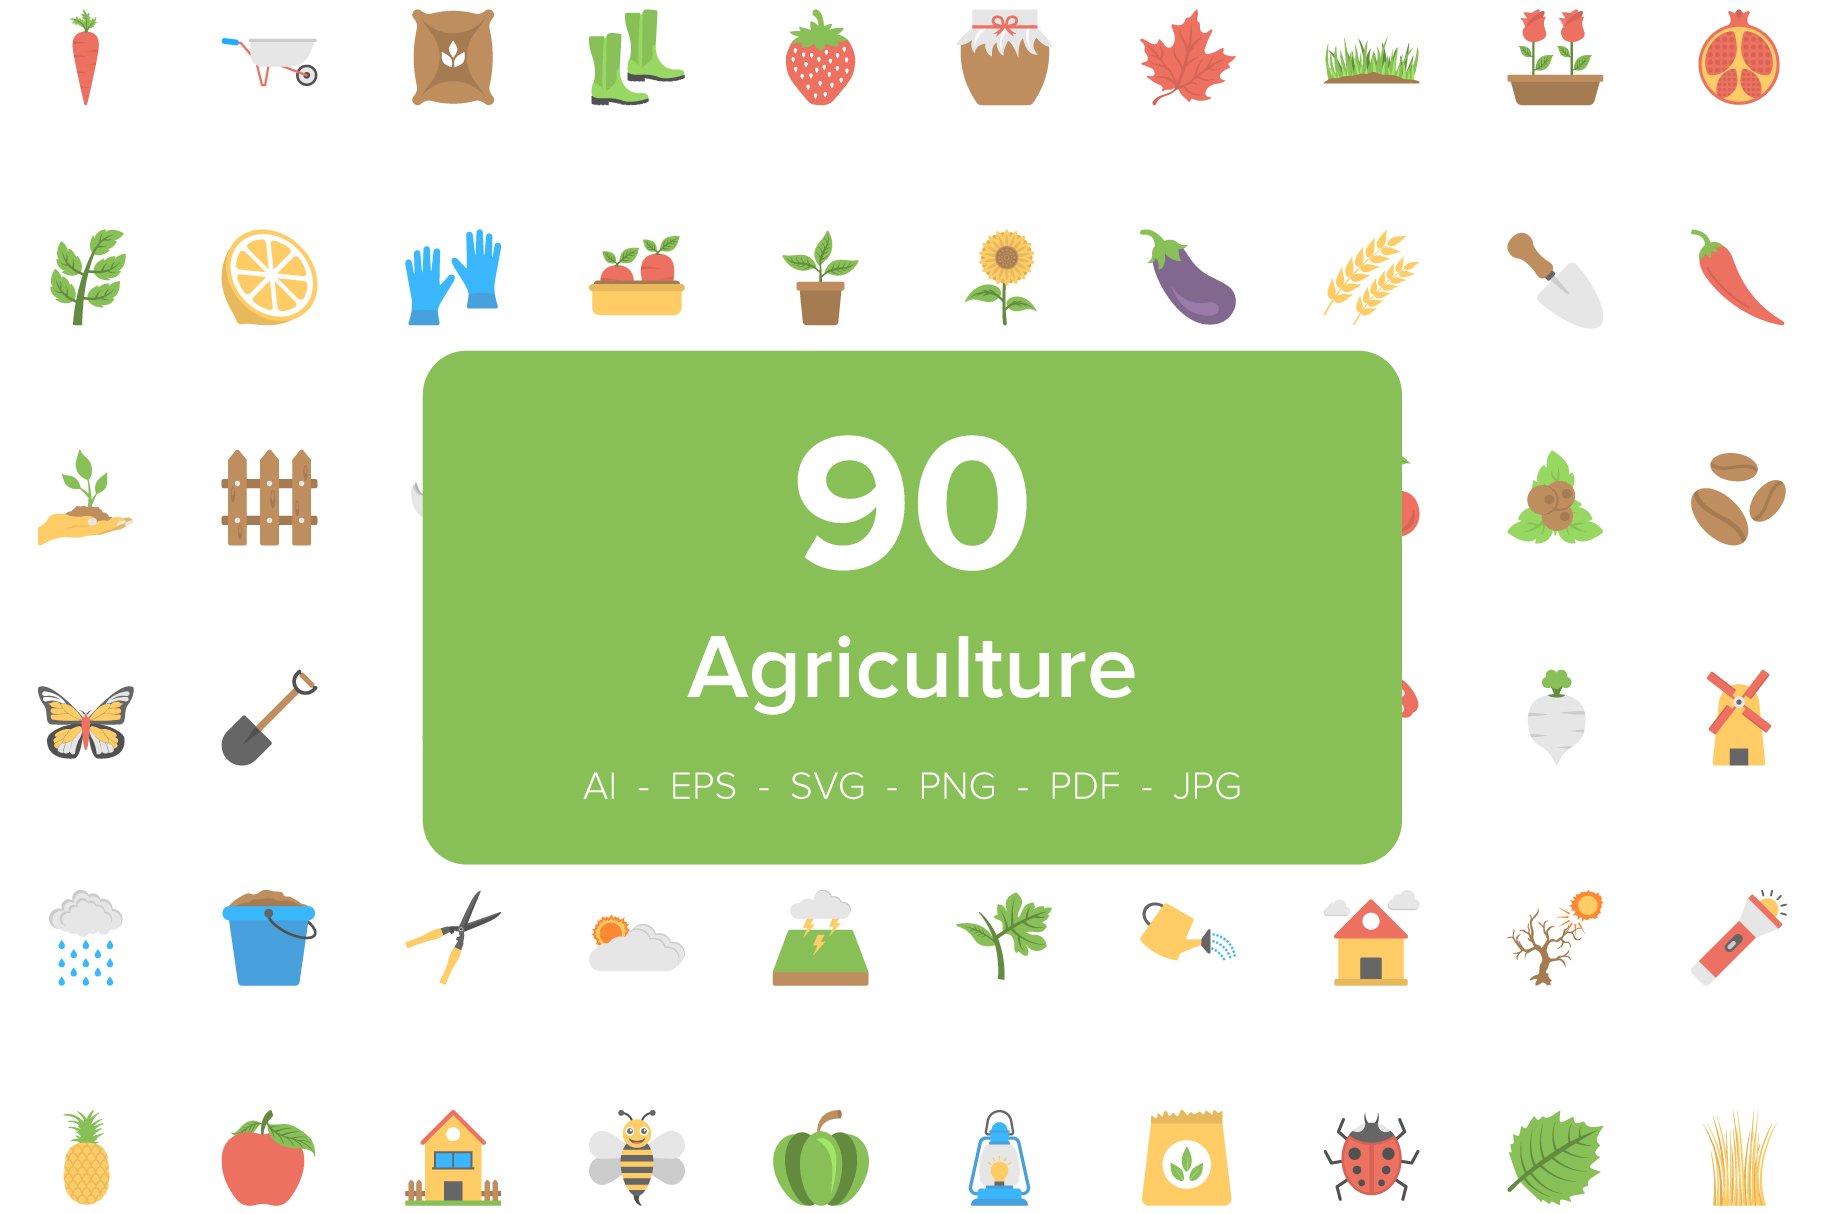 90 Agriculture Flat Vector Icons cover image.